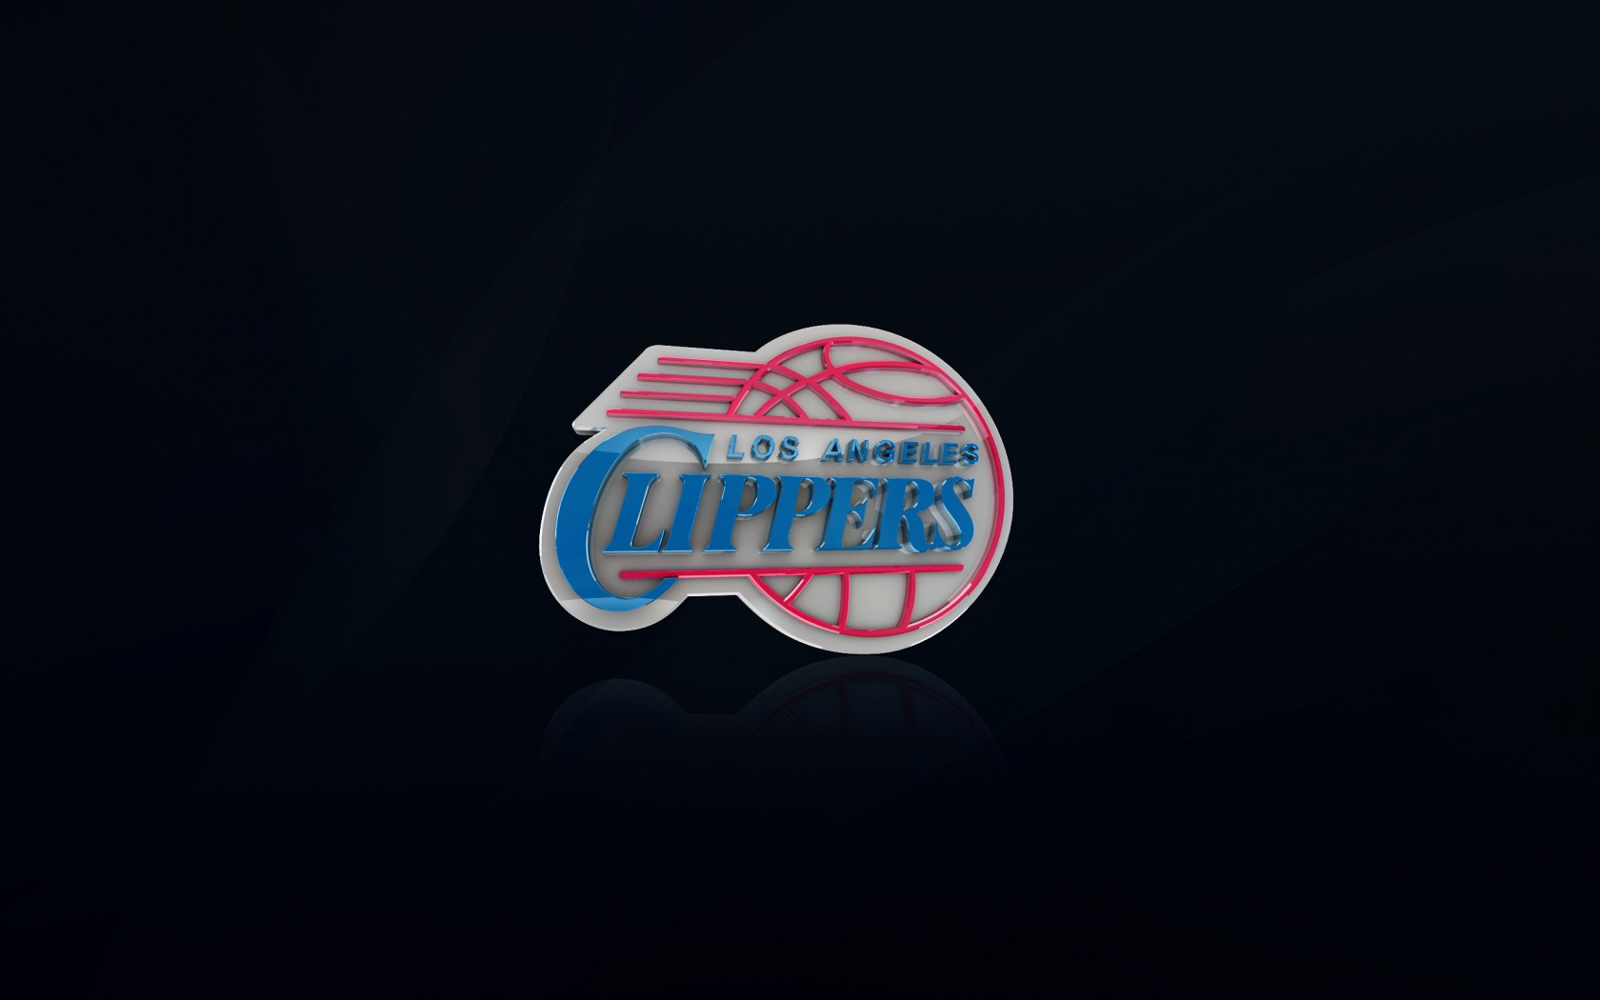 Los Angeles Clippers Are A Professional Basketball Team In